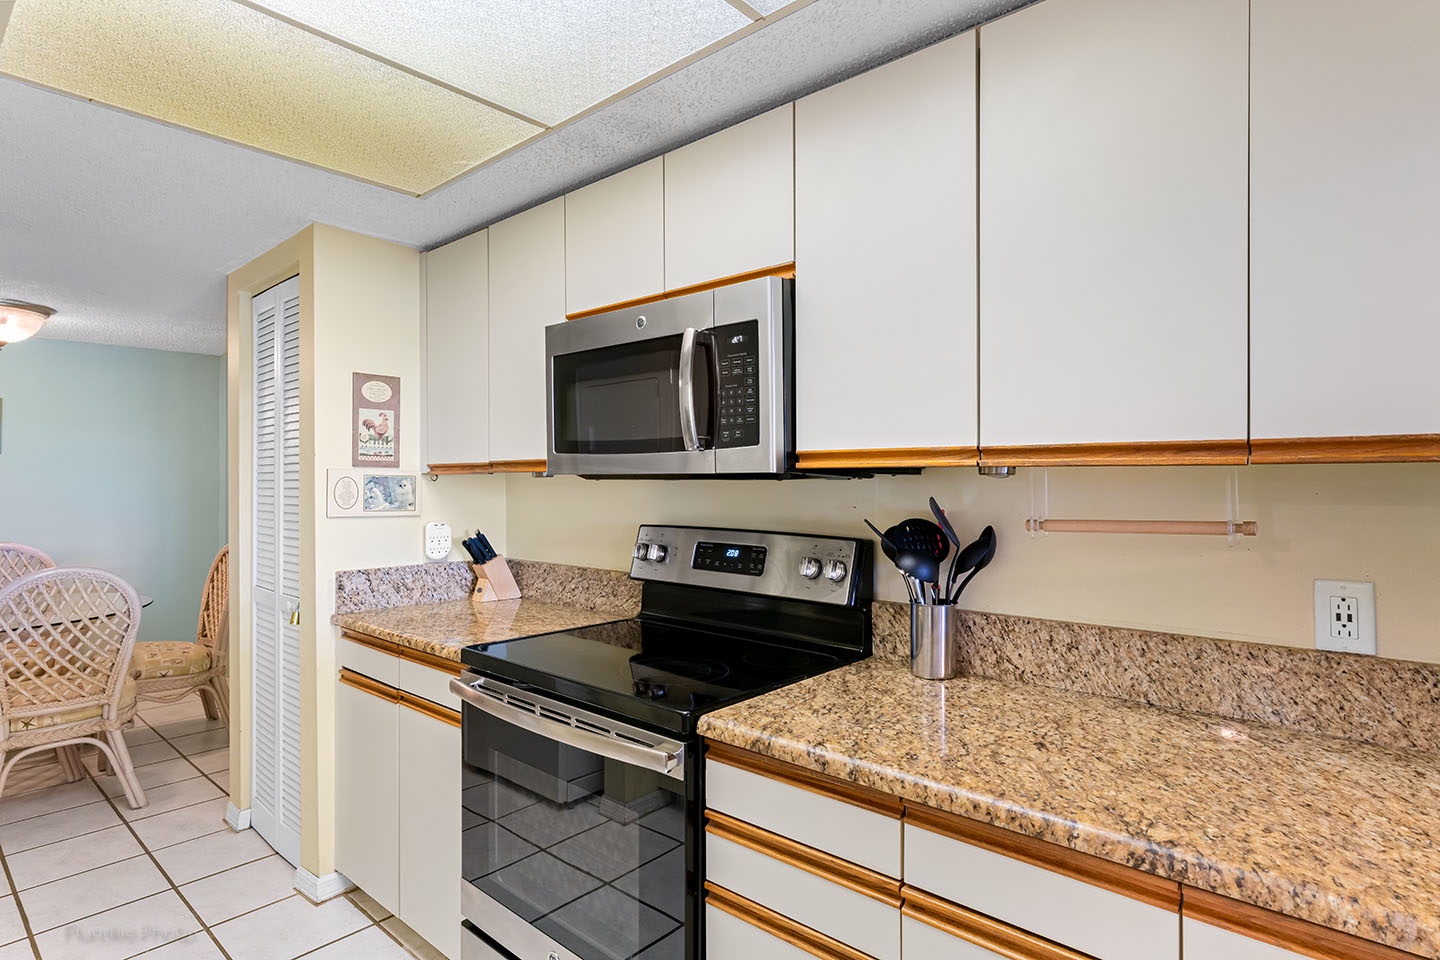 Kitchen has granite counters and glass stove top